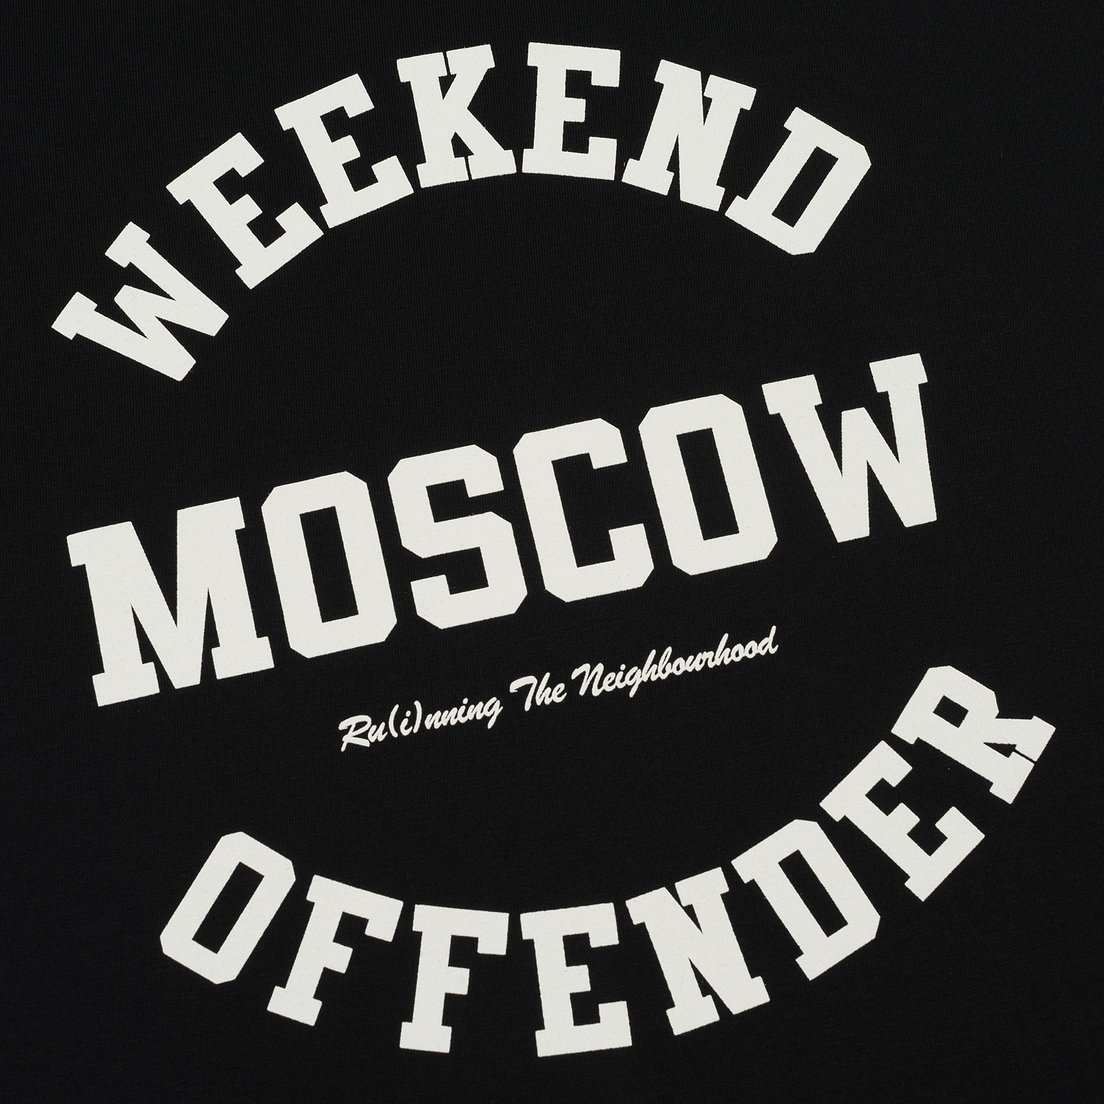 Weekend Offender Мужская футболка City Collection Moscow